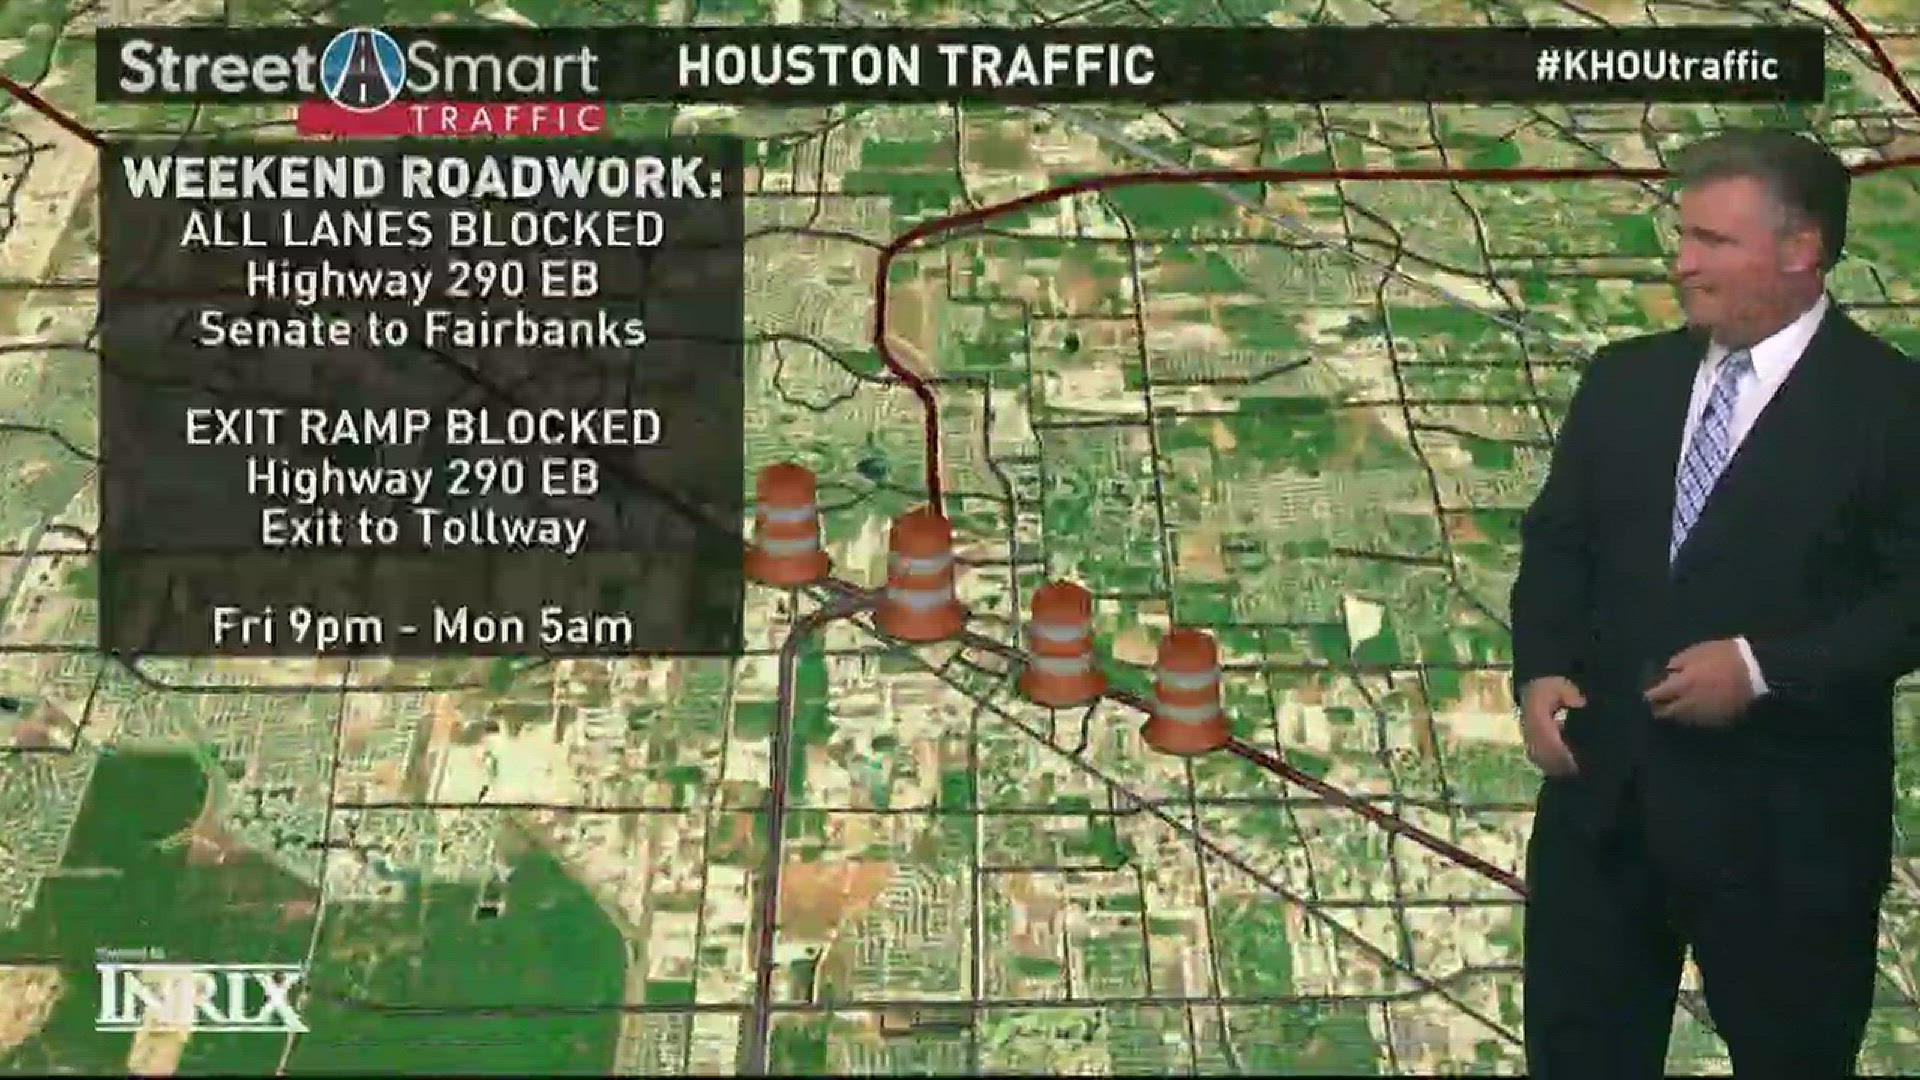 KHOU 11 Traffic Anchor Darby Douglas has what you need to know regarding traffic updates and road closures for this weekend.